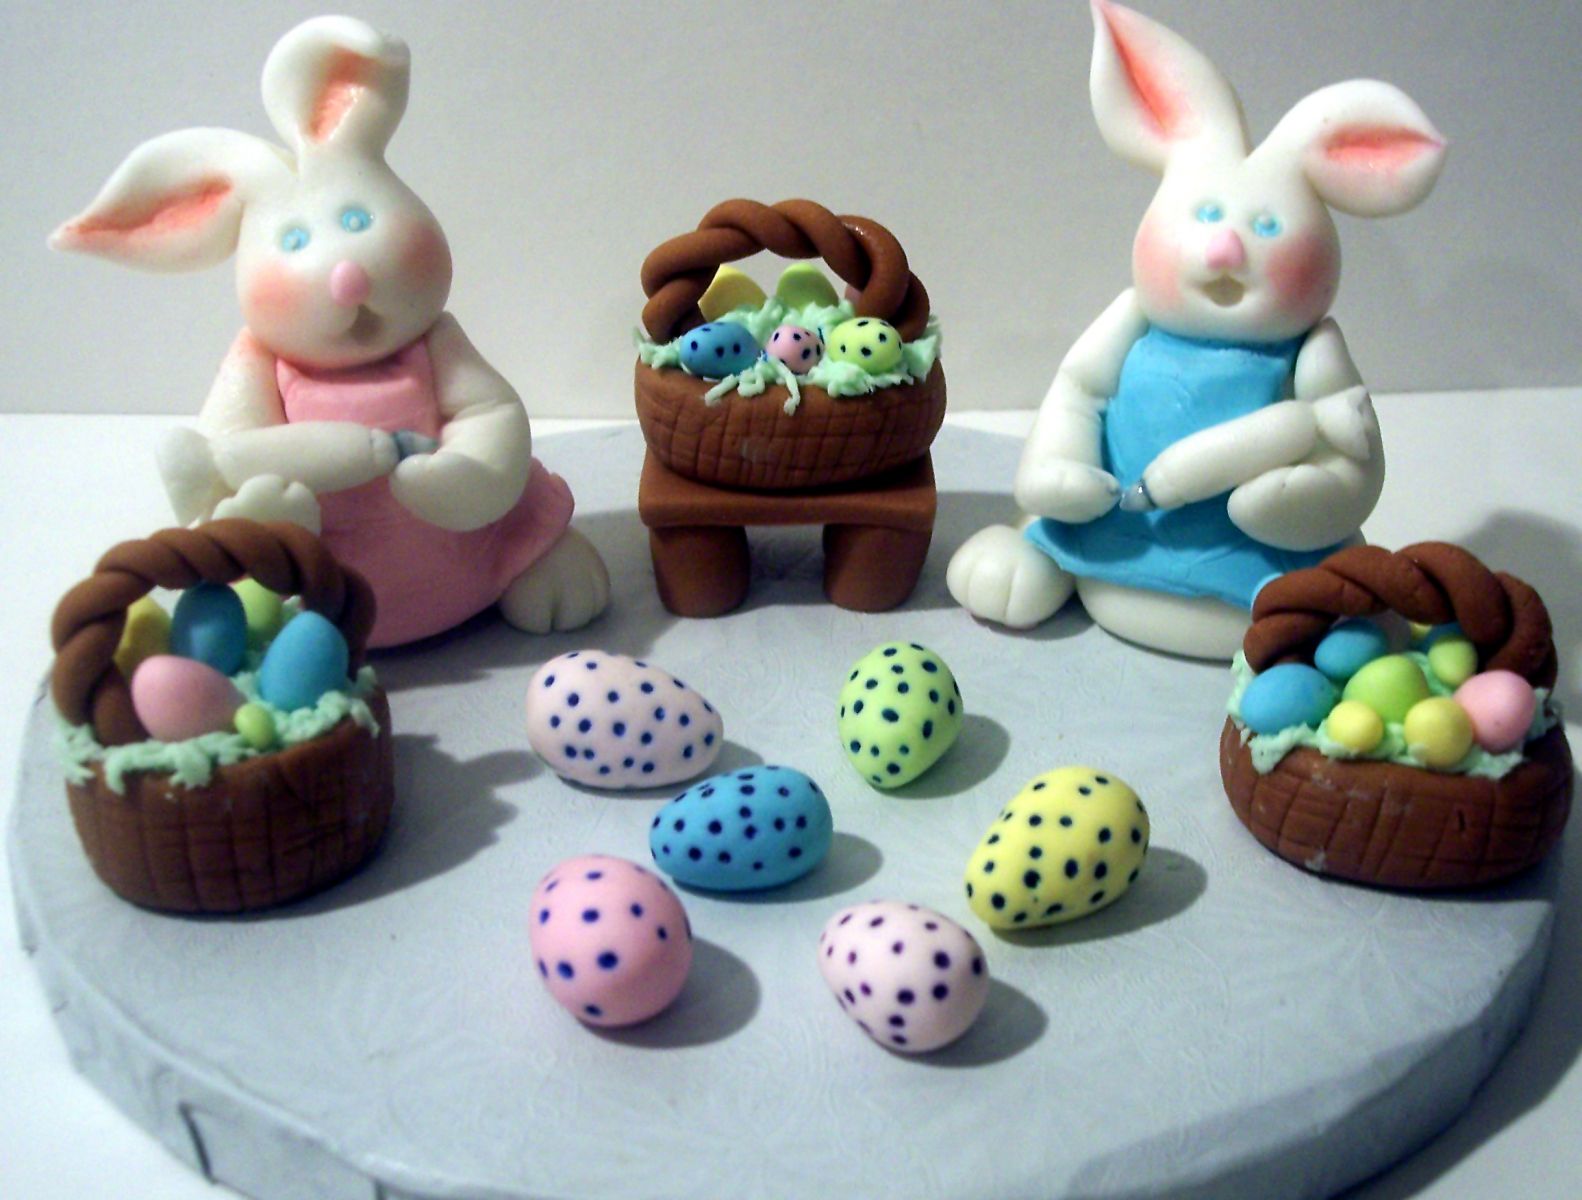 Fondant Easter Cakes Ideas by Antioxidant | iFood.tv